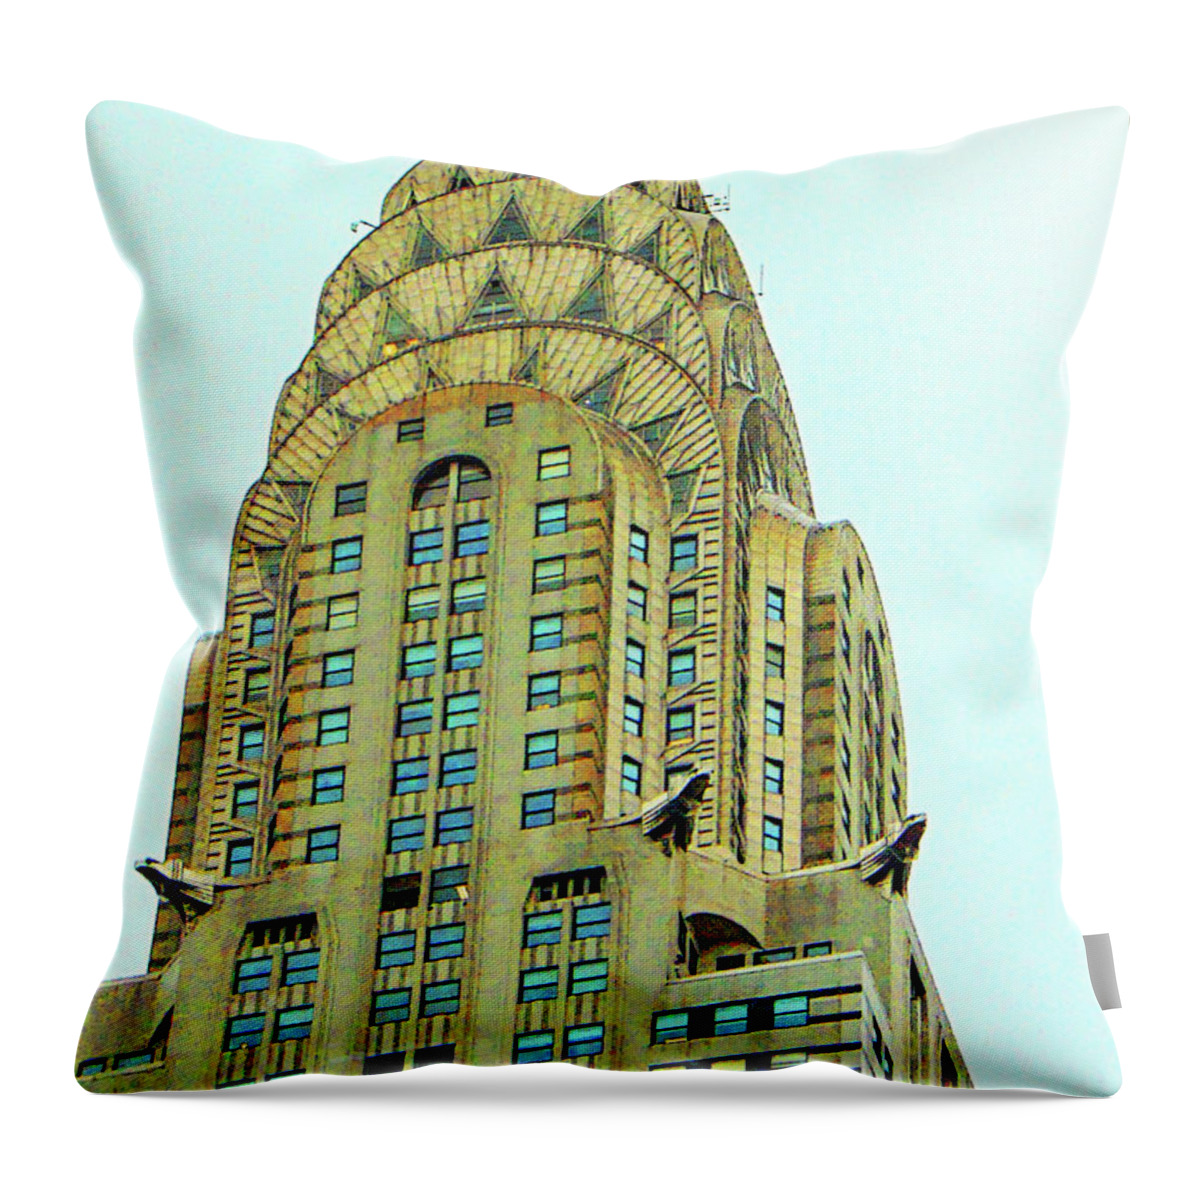  Throw Pillow featuring the digital art Chrysler Building by Darcy Dietrich